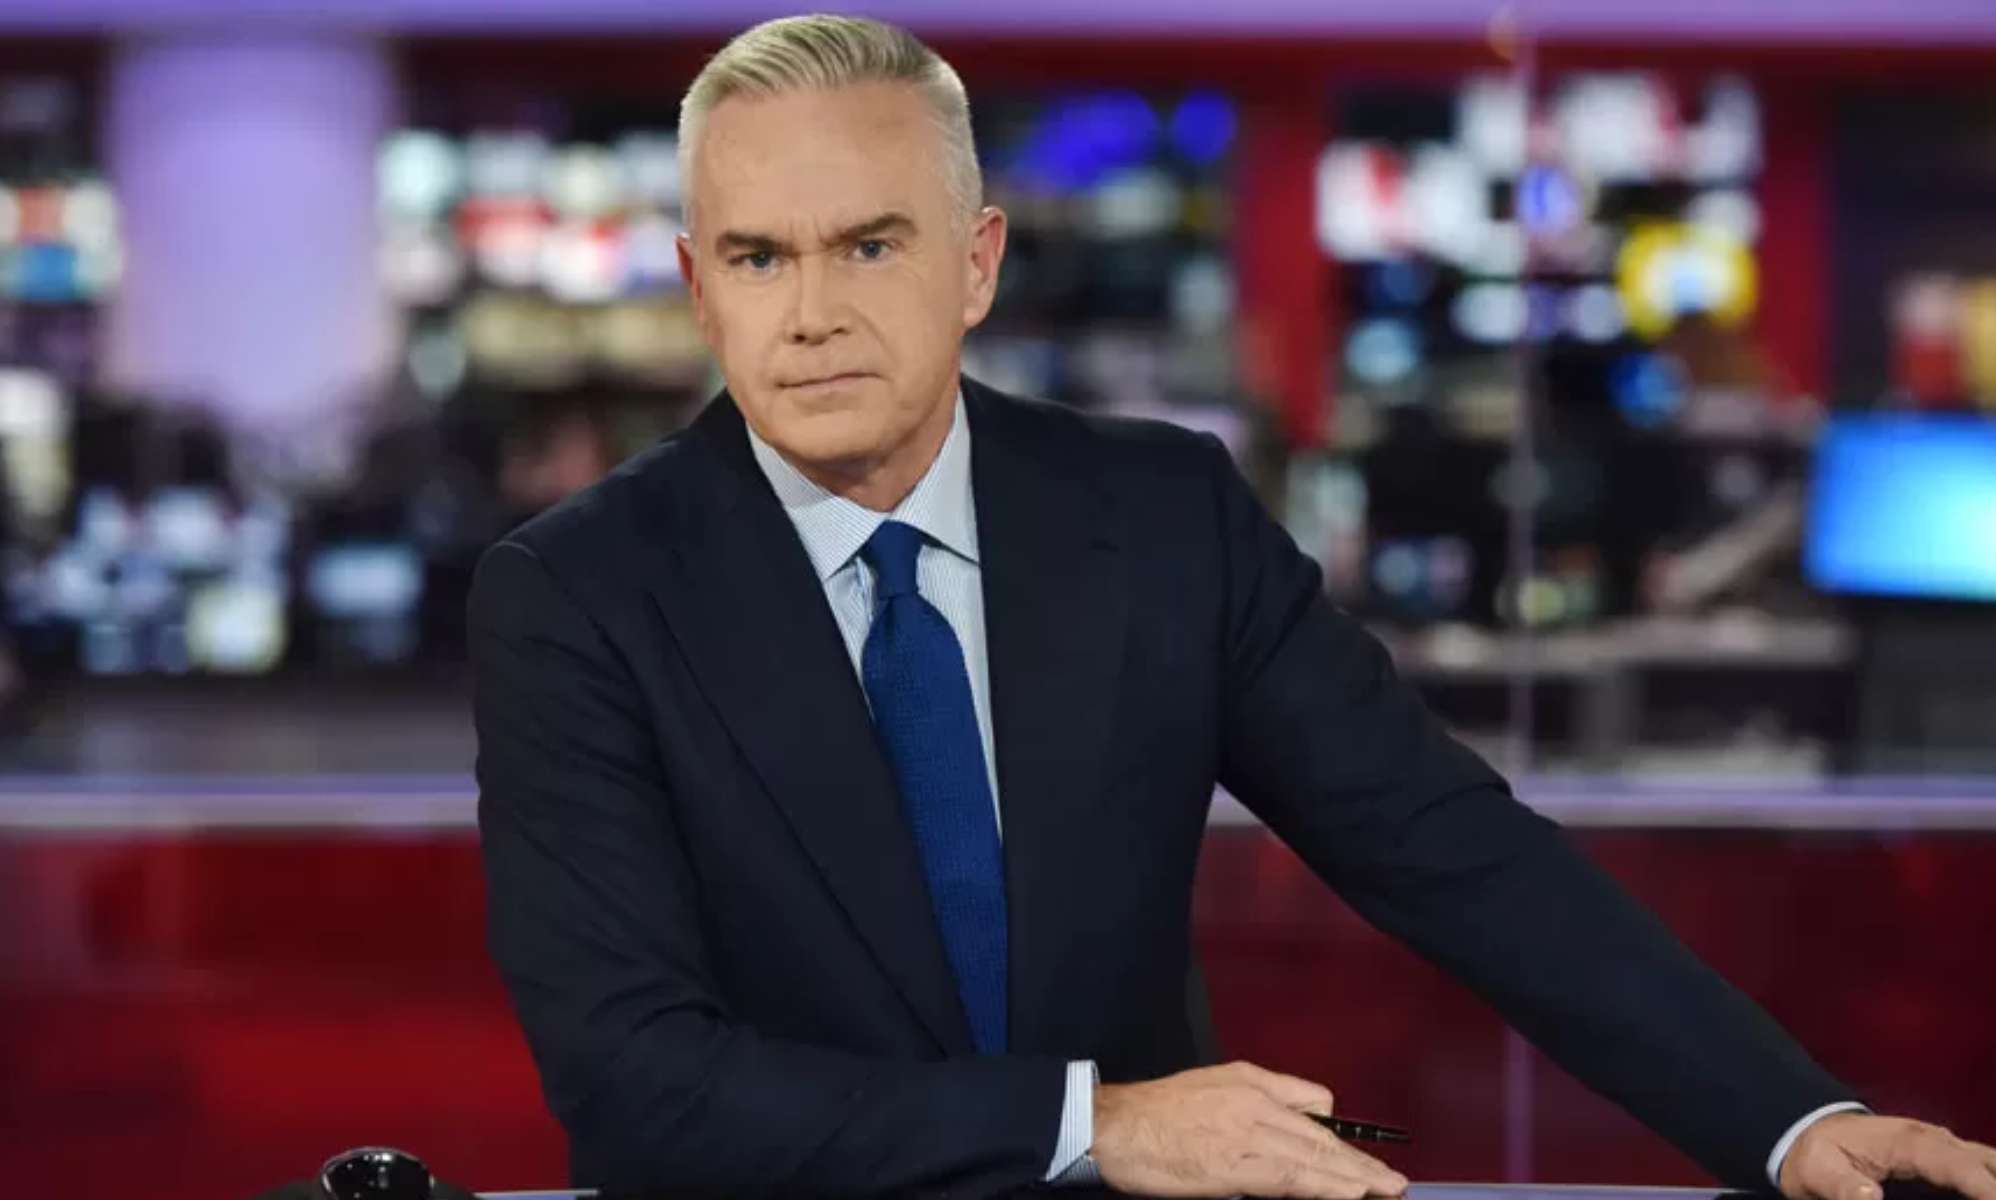 Huw Edwards named as suspended BBC presenter picture